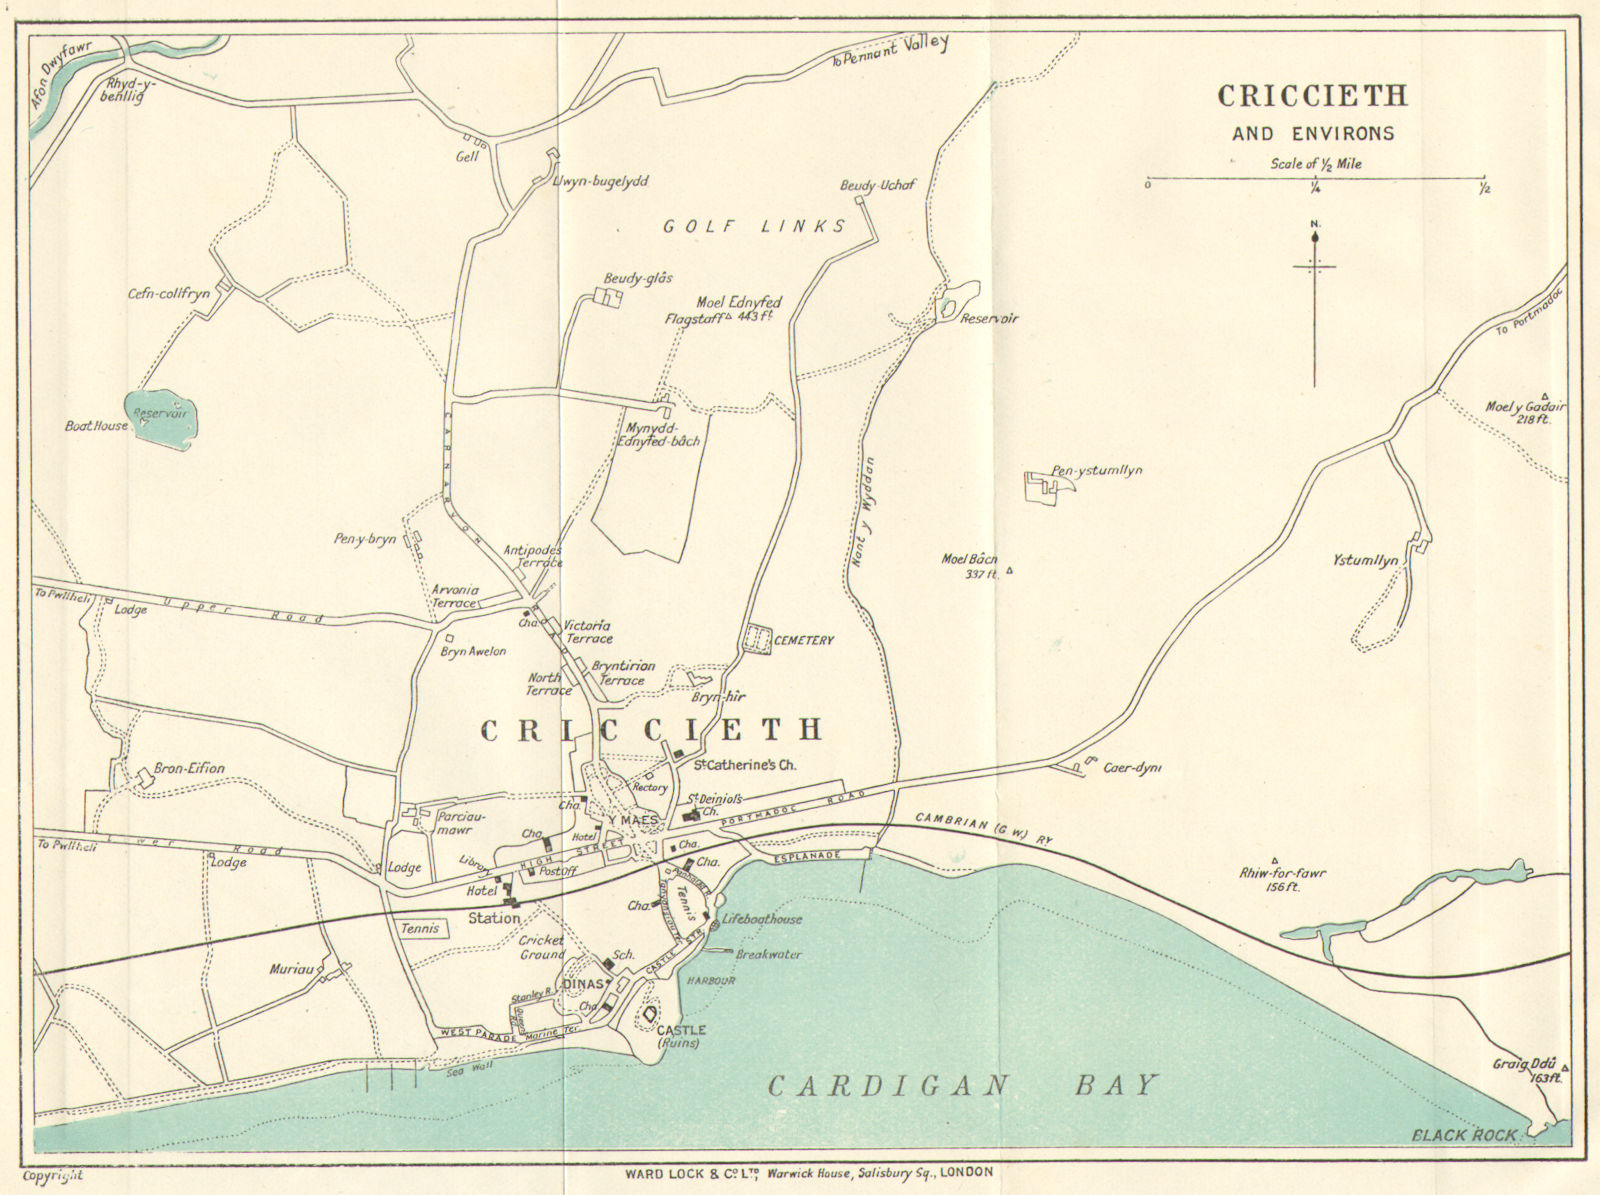 CRICCIETH AND ENVIRONS vintage town/city plan. Wales. WARD LOCK c1928 old map